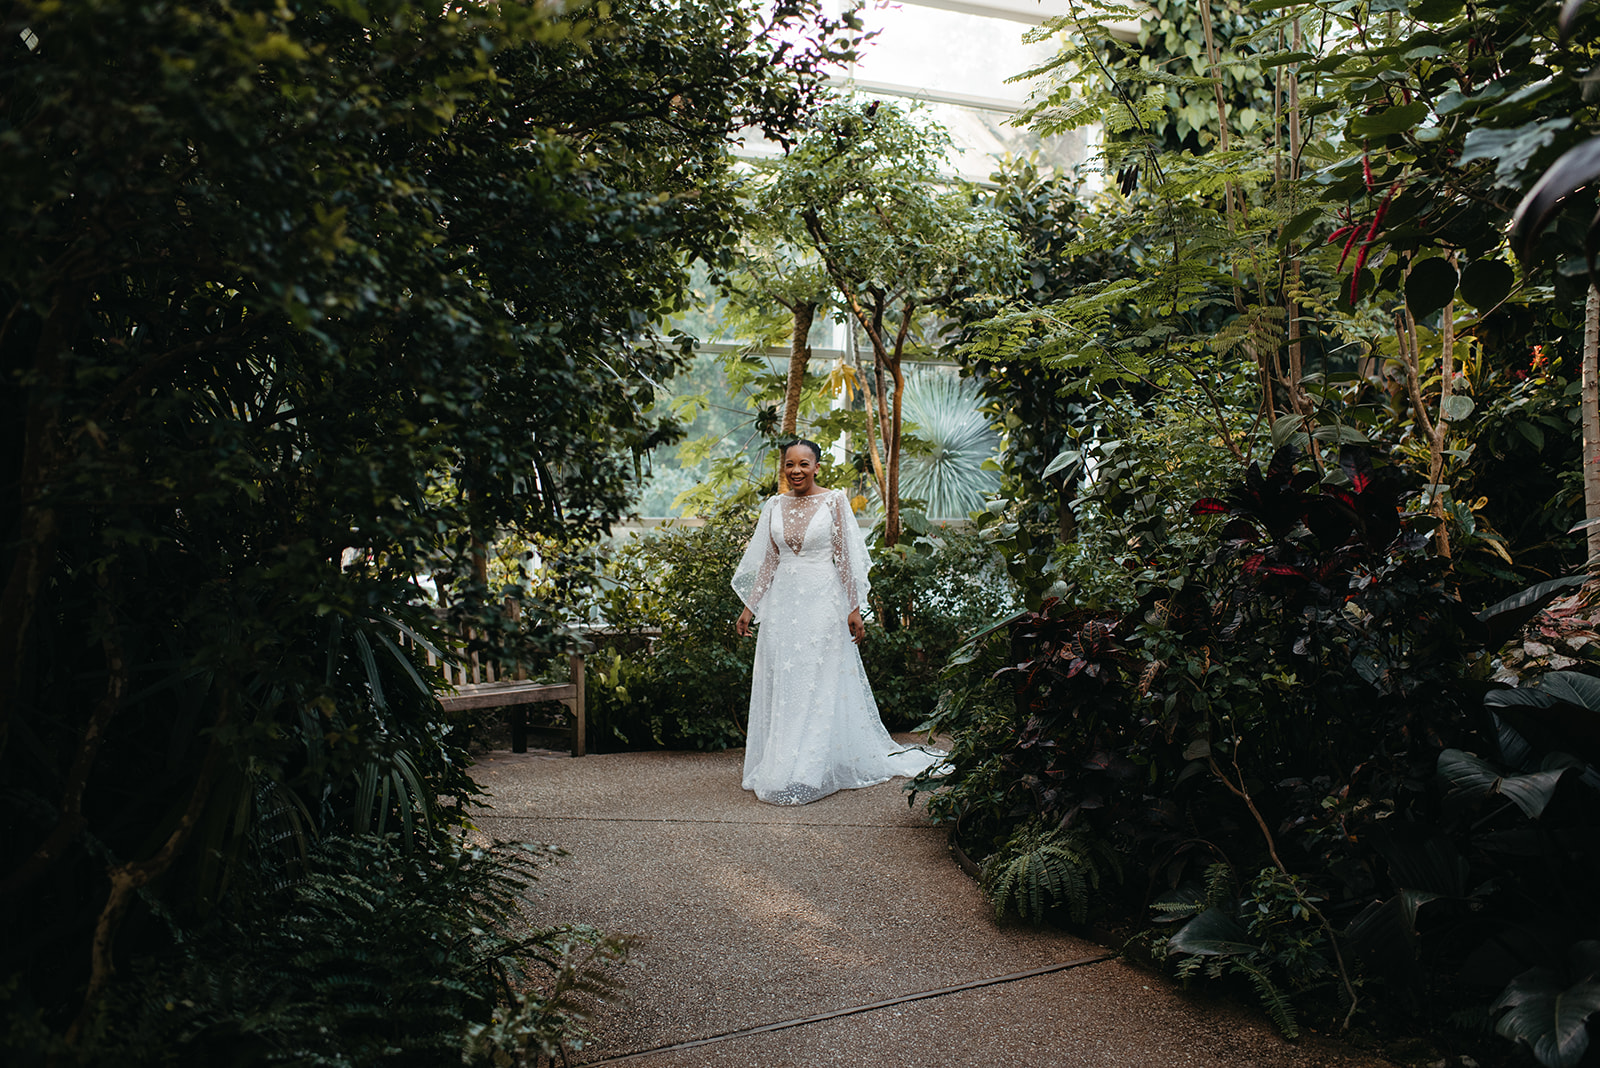 Museum of Life and Science Wedding Photographer  in Durham NC 